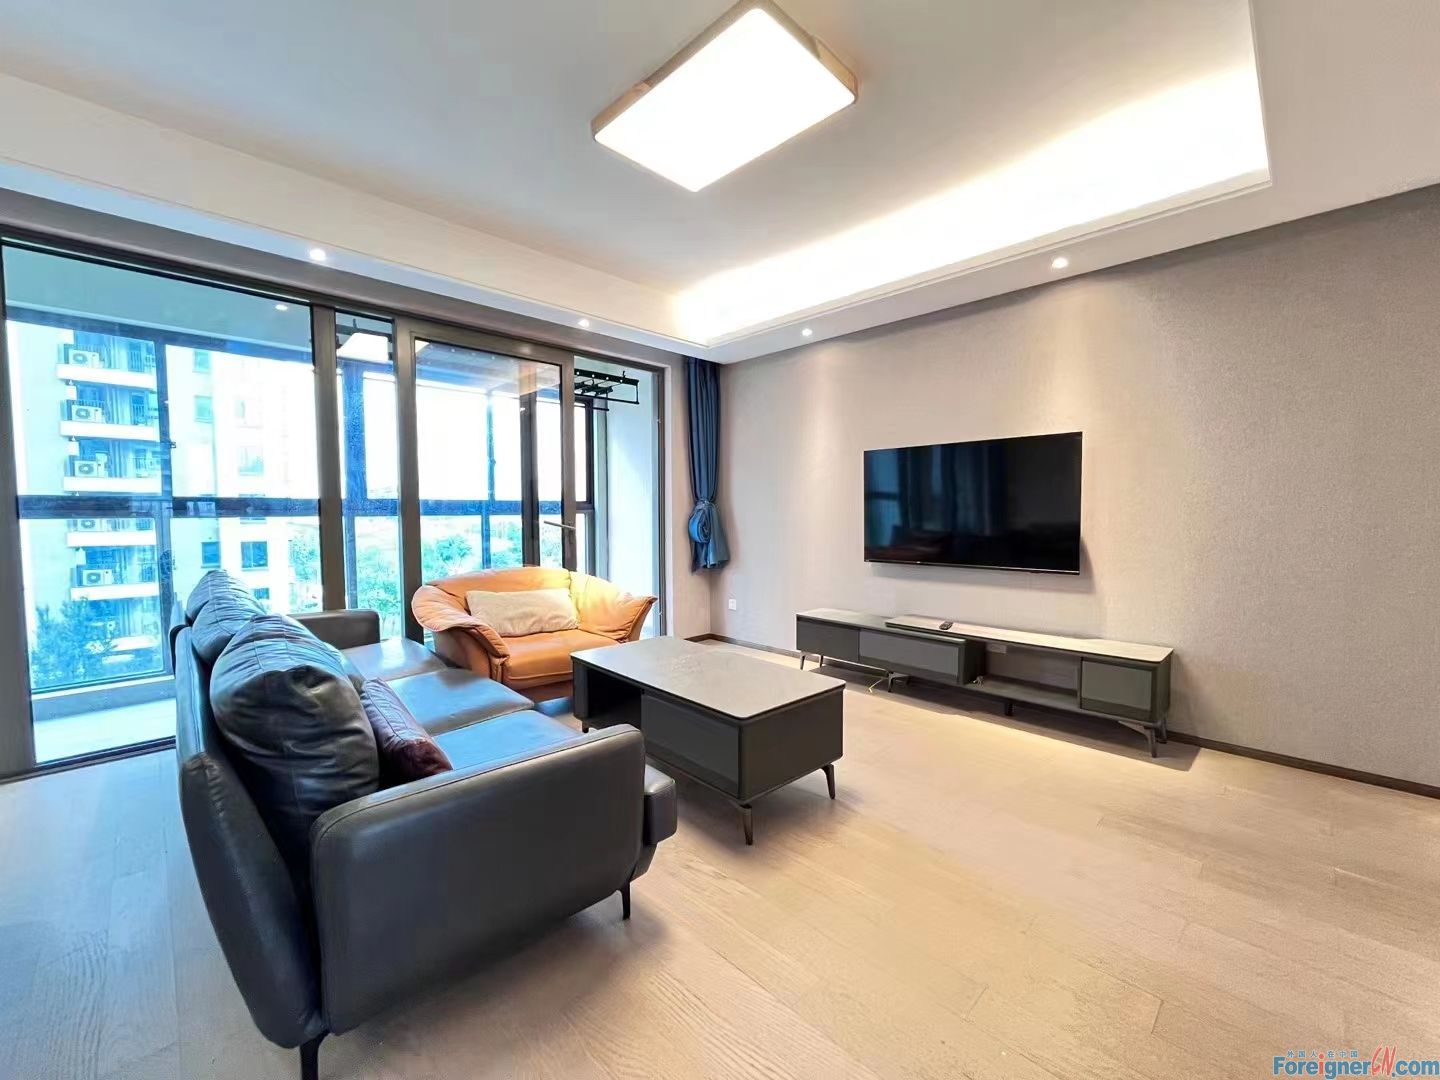 Stunning!!! Global Condo Apartment to rent in SIP/ 4 bedrooms and 2 bathrooms/Spacious,quality furniture,modern design/Close to Olympic Center ,SIPFLS，SSIS，OCAC schools